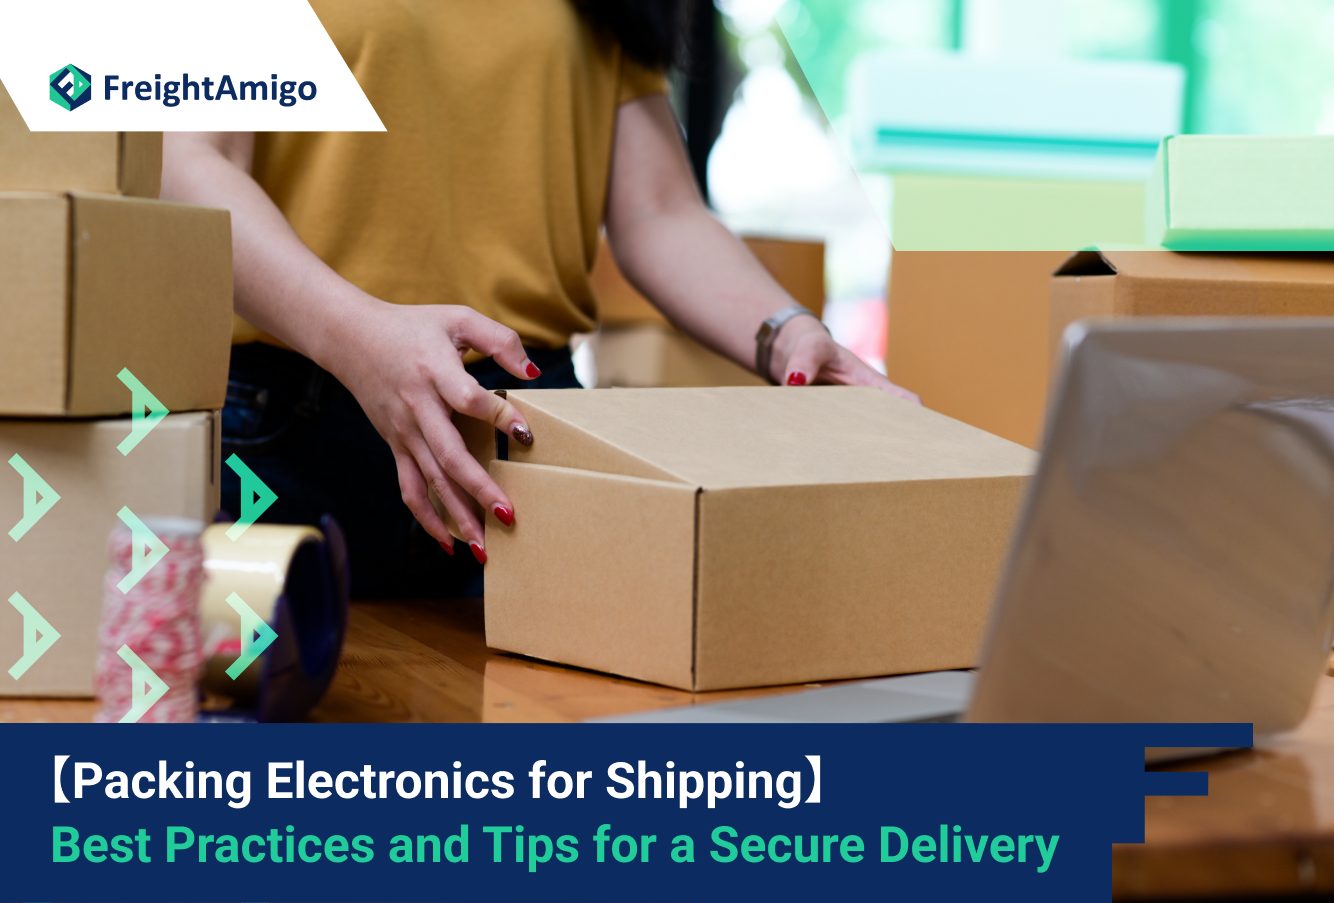 【Packing Electronics for Shipping】 Best Practices and Tips for a Secure Delivery